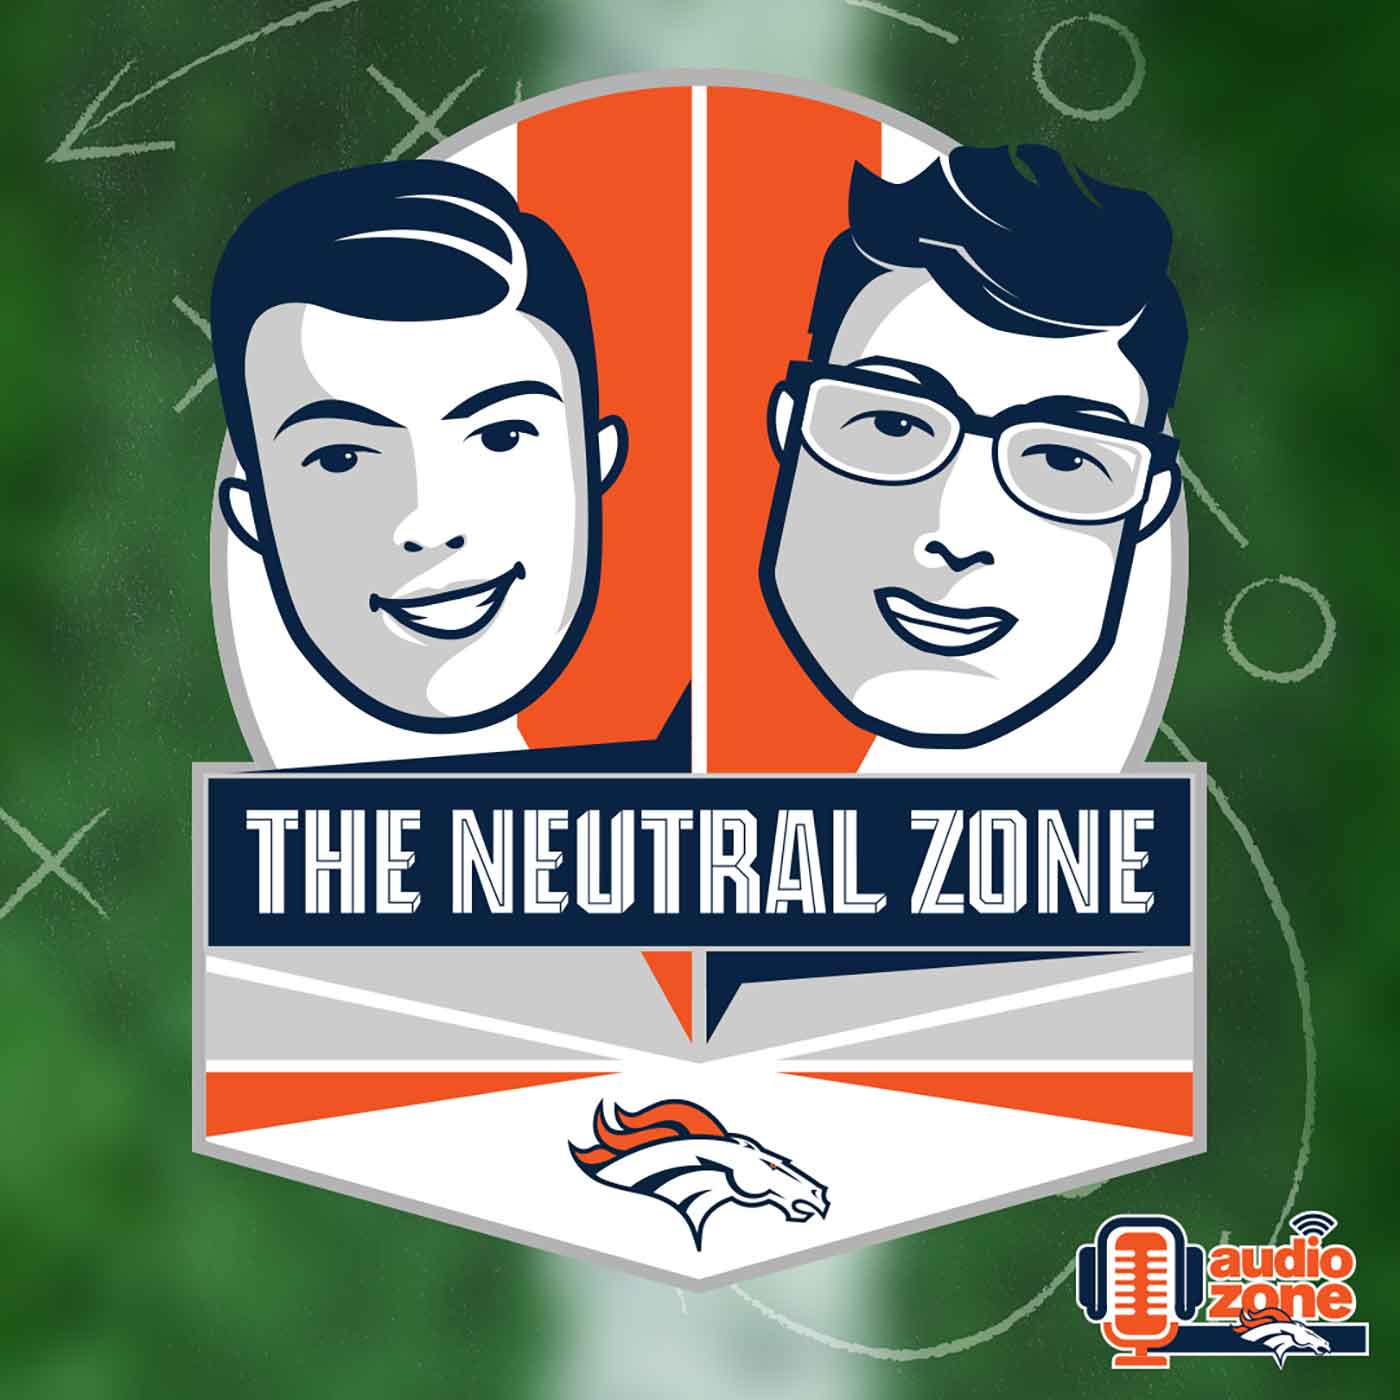 The Neutral Zone: How will the Broncos combat the Texans' high-powered passing attack?